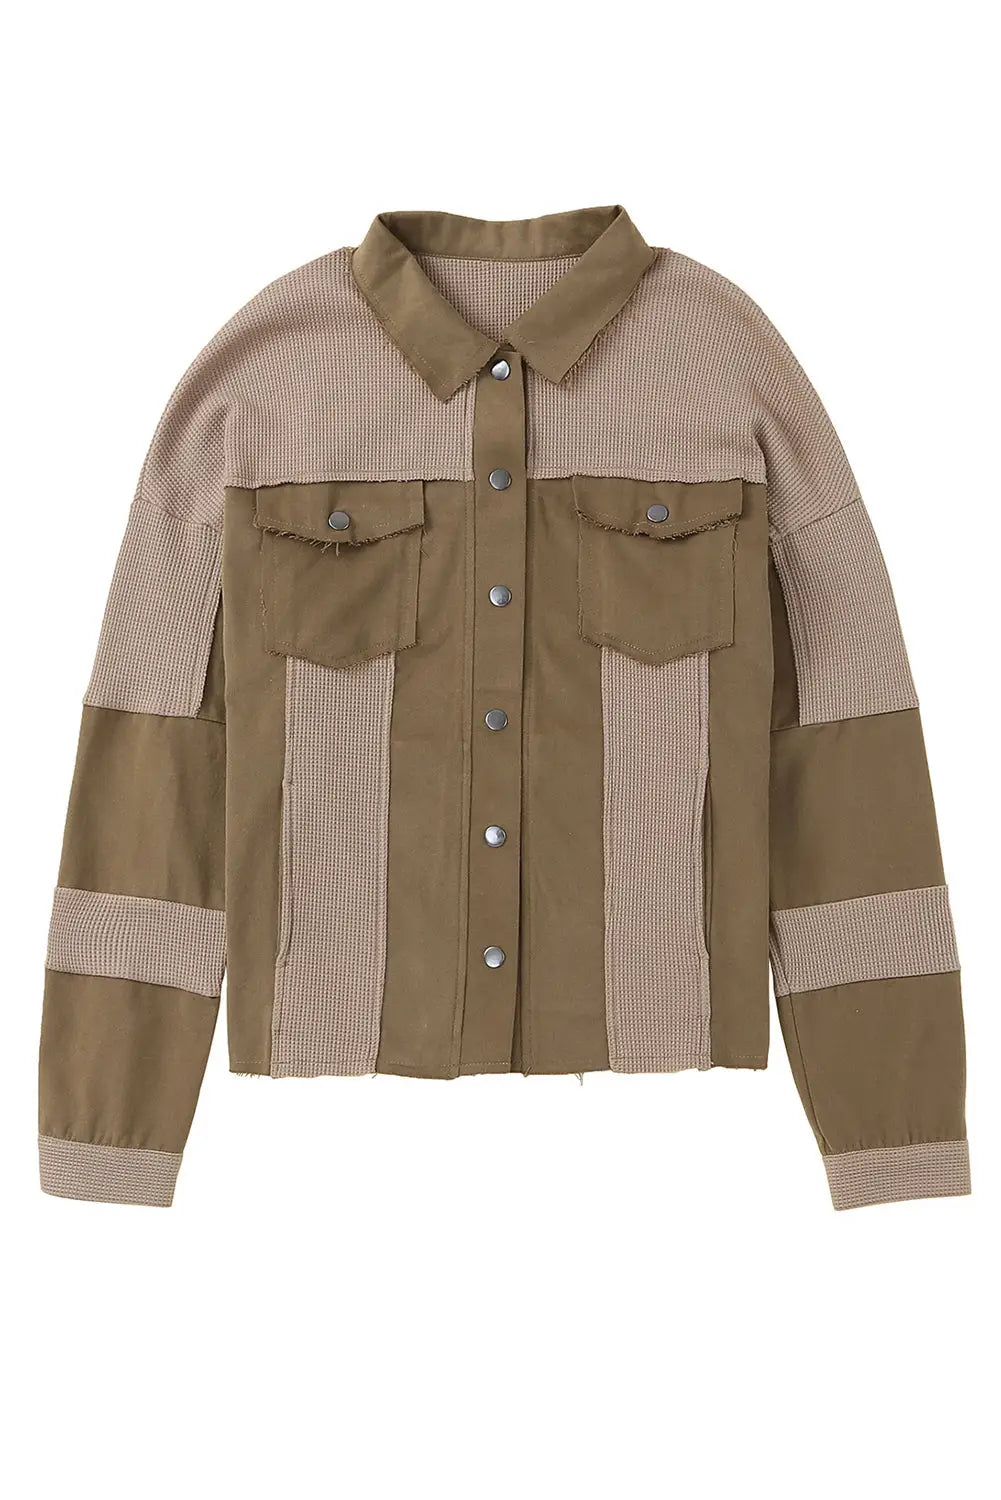 Brown ripped seam detail button up waffle knit jacket - lightweight jackets